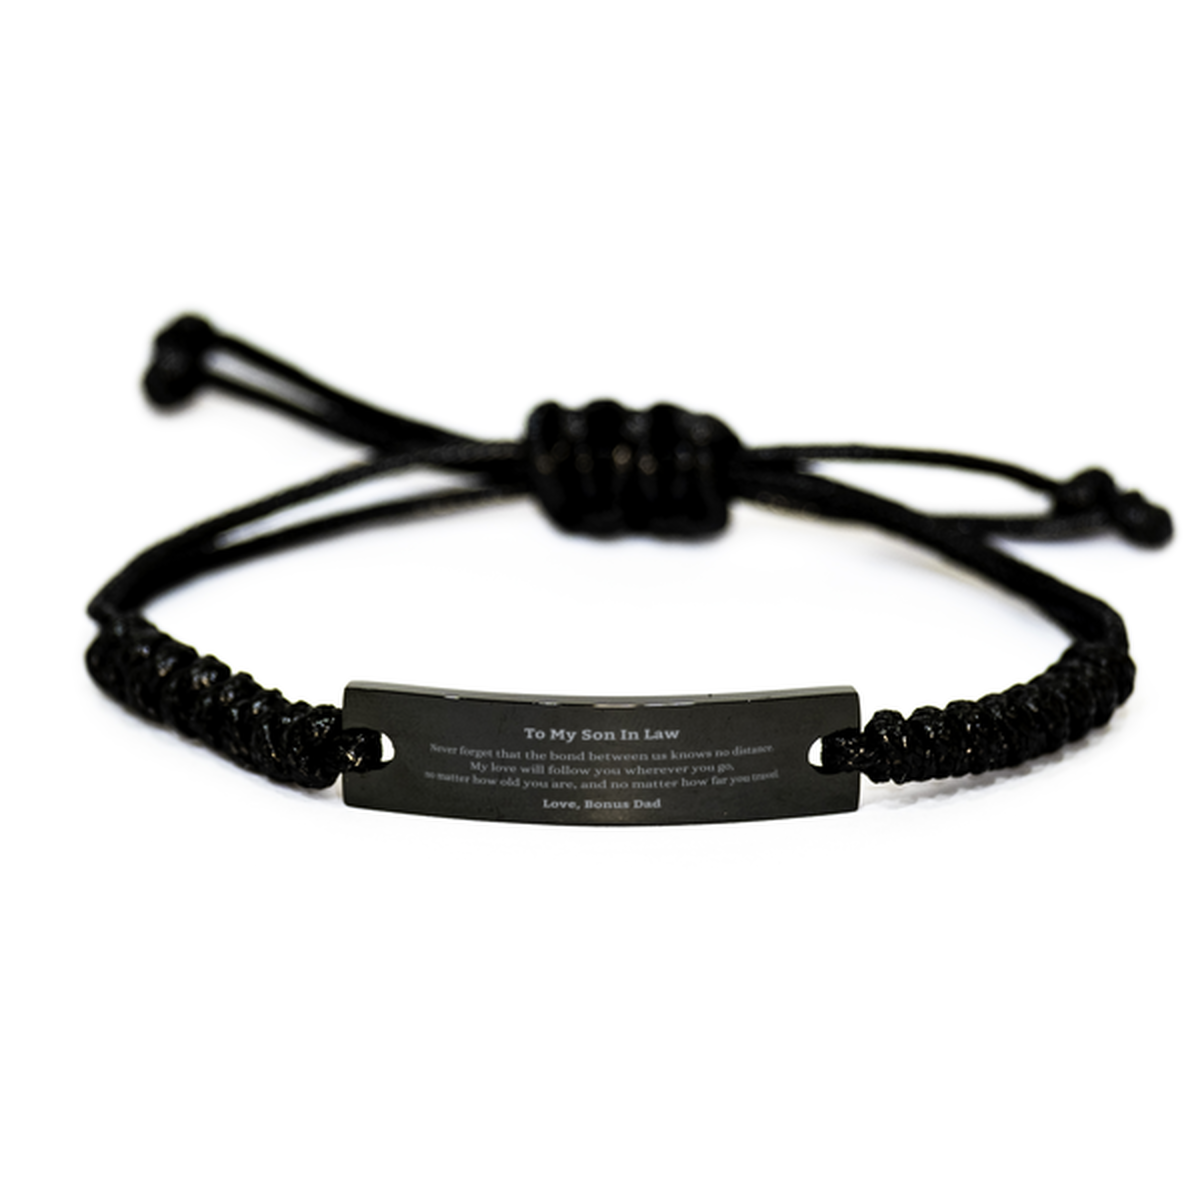 Son In Law Birthday Gifts from Bonus Dad, Adjustable Black Rope Bracelet for Son In Law Christmas Graduation Unique Gifts Son In Law Never forget that the bond between us knows no distance. Love, Bonus Dad